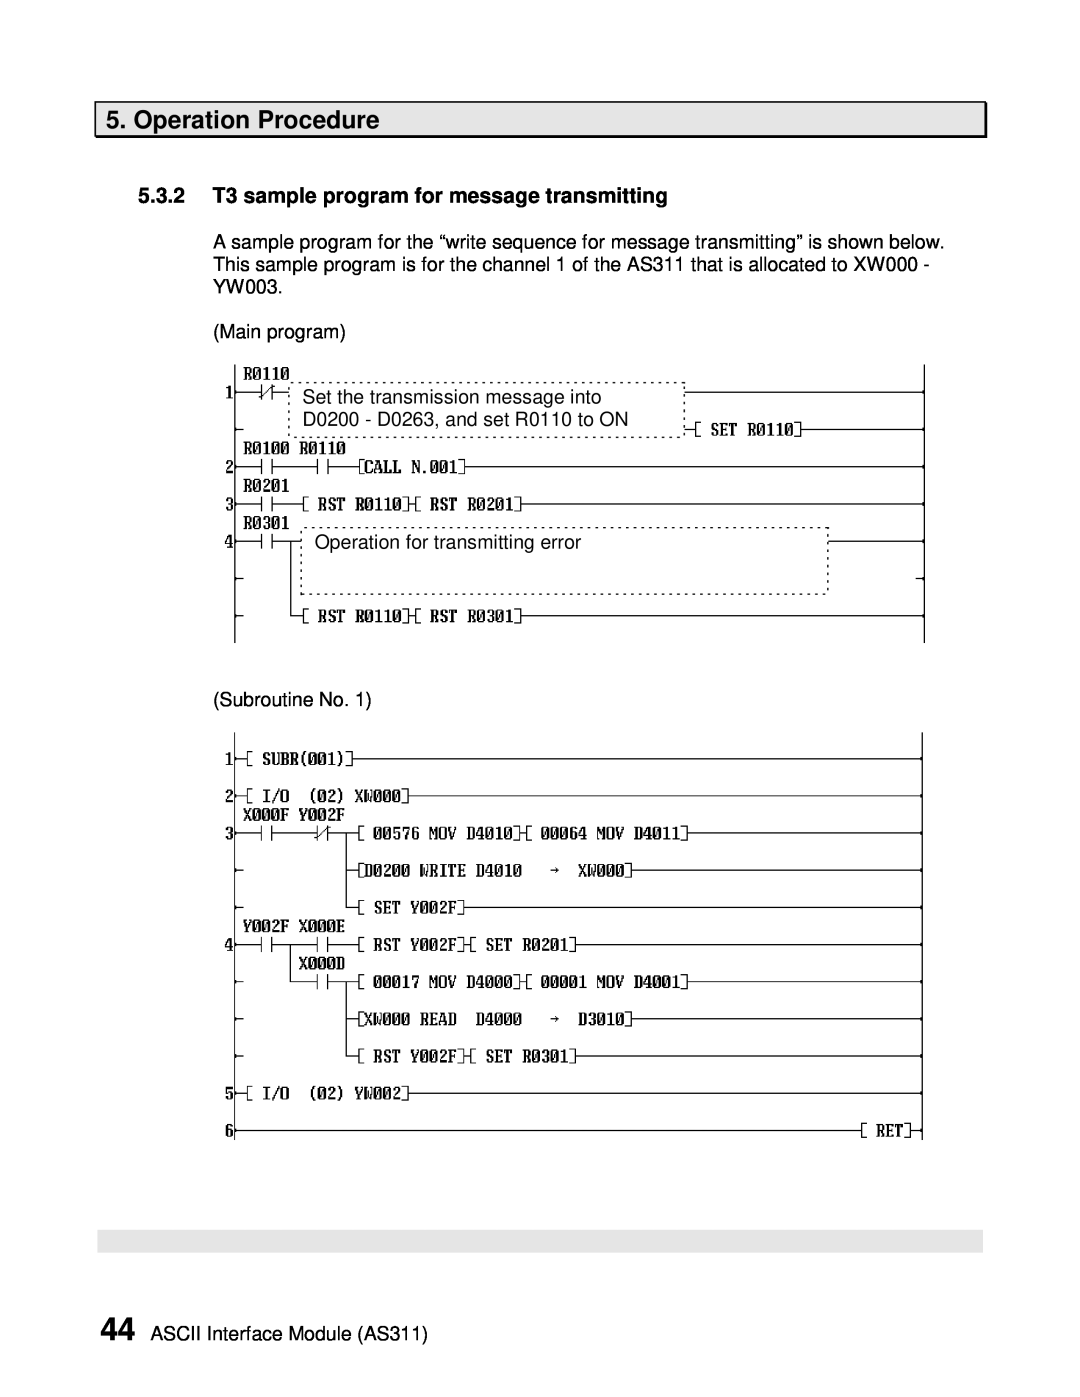 Toshiba AS311 user manual 5.3.2 T3 sample program for message transmitting, Operation Procedure, Subroutine No 